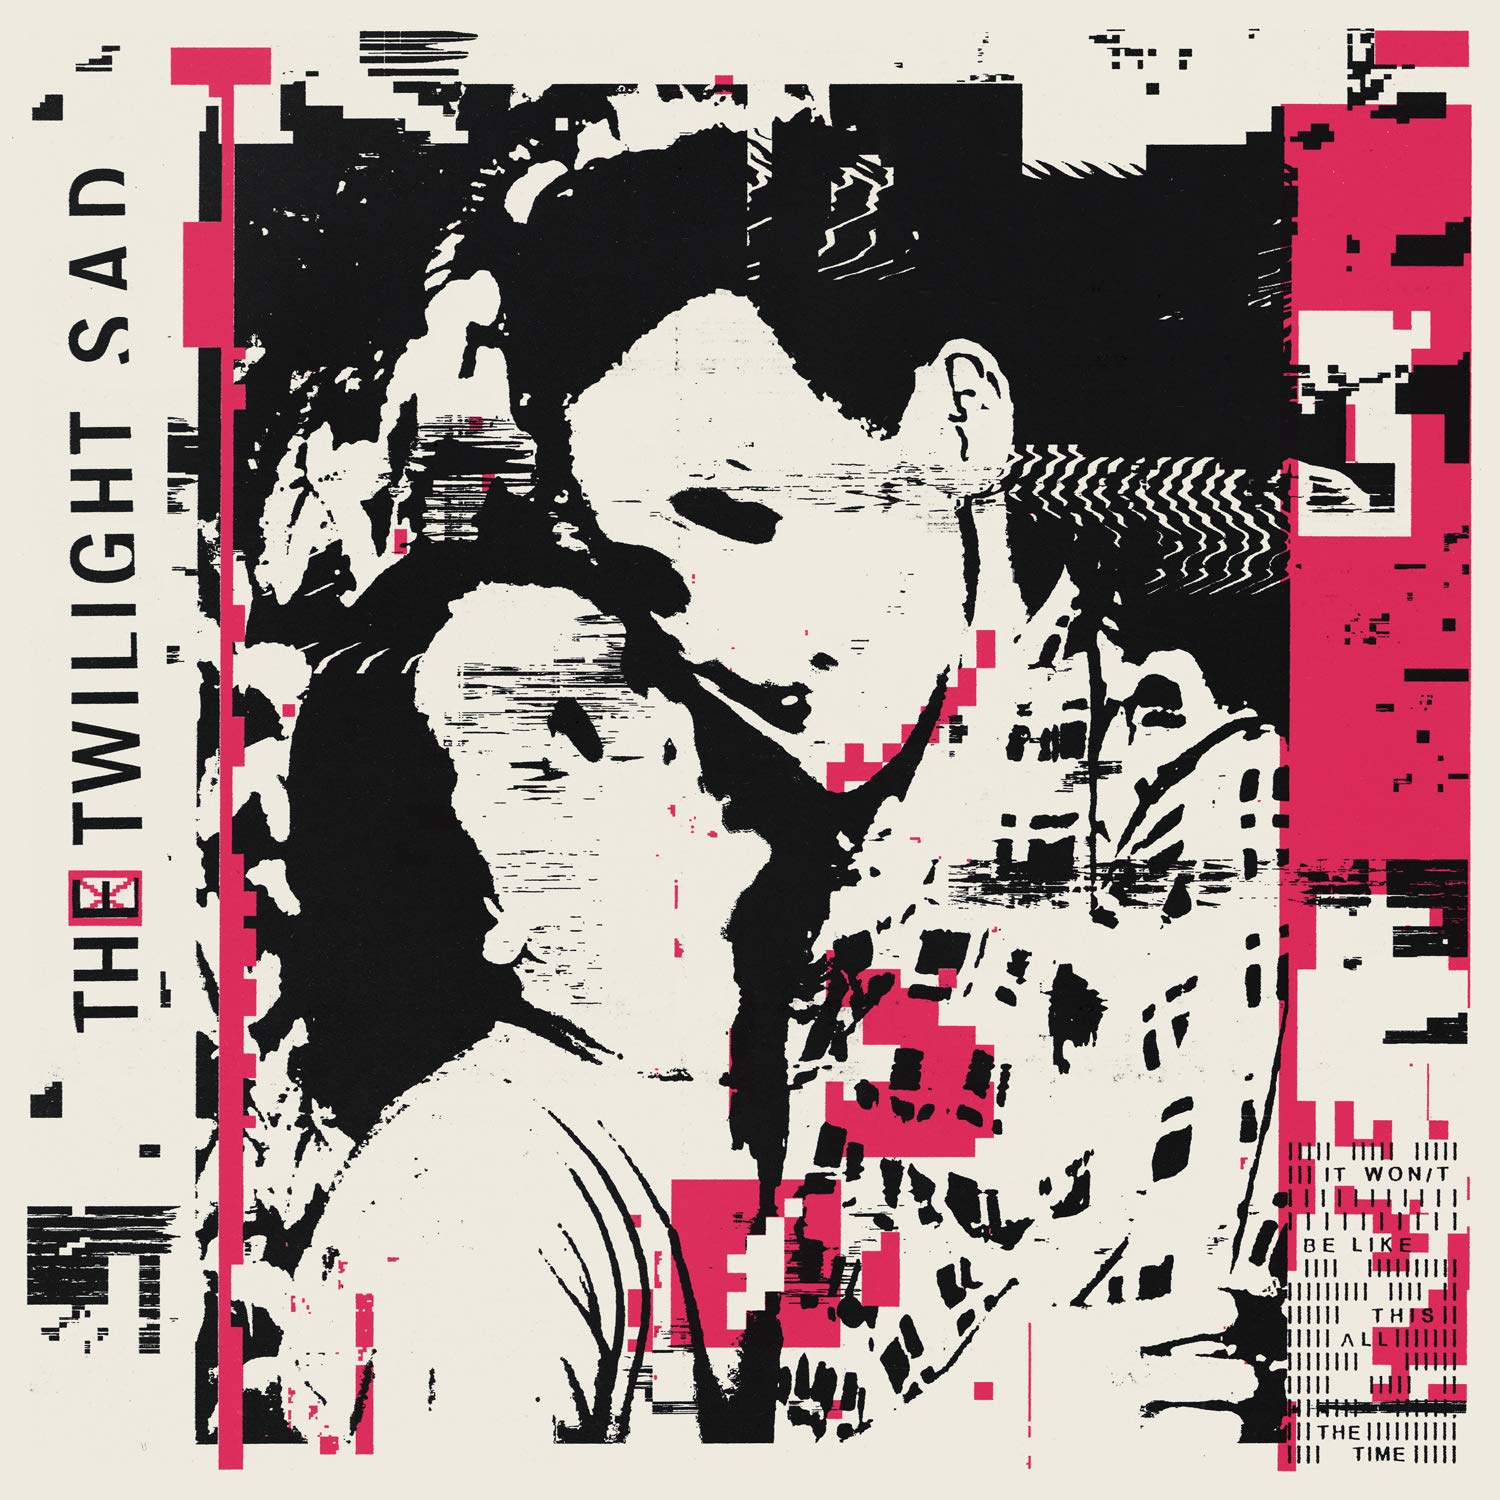 The Twilight Sad - It Won't Be Like This All The Time vinyl cover